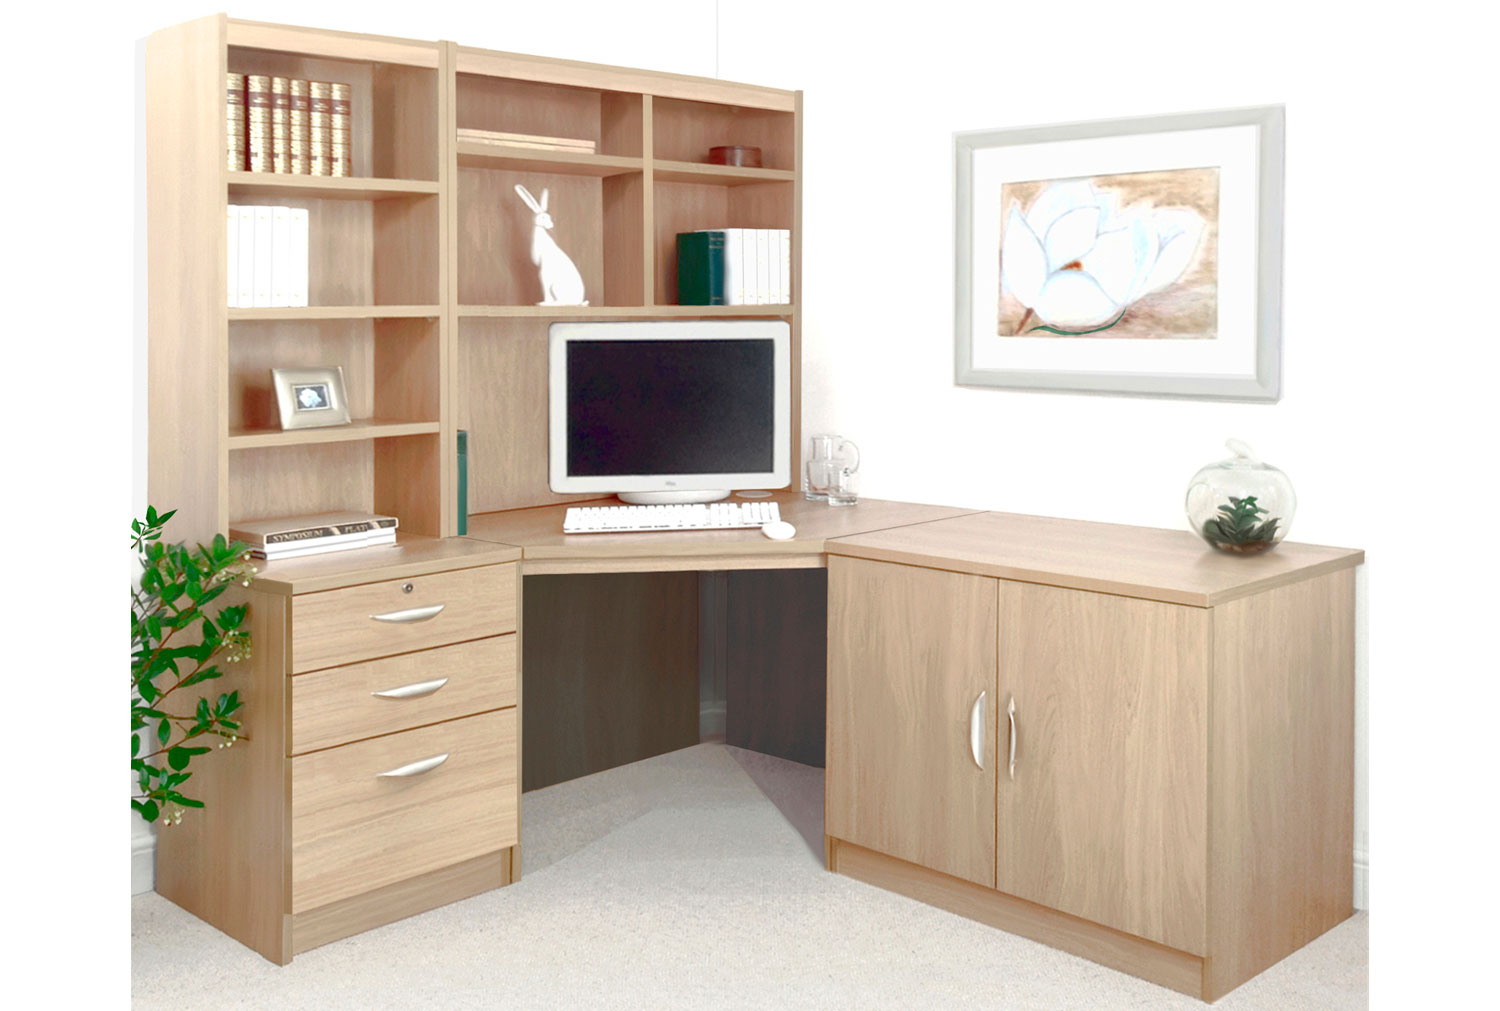 Small Office Corner Home Office Desk Set With 3 Drawers Cupboard & Hutch Bookcases (Sandstone), Sandstone